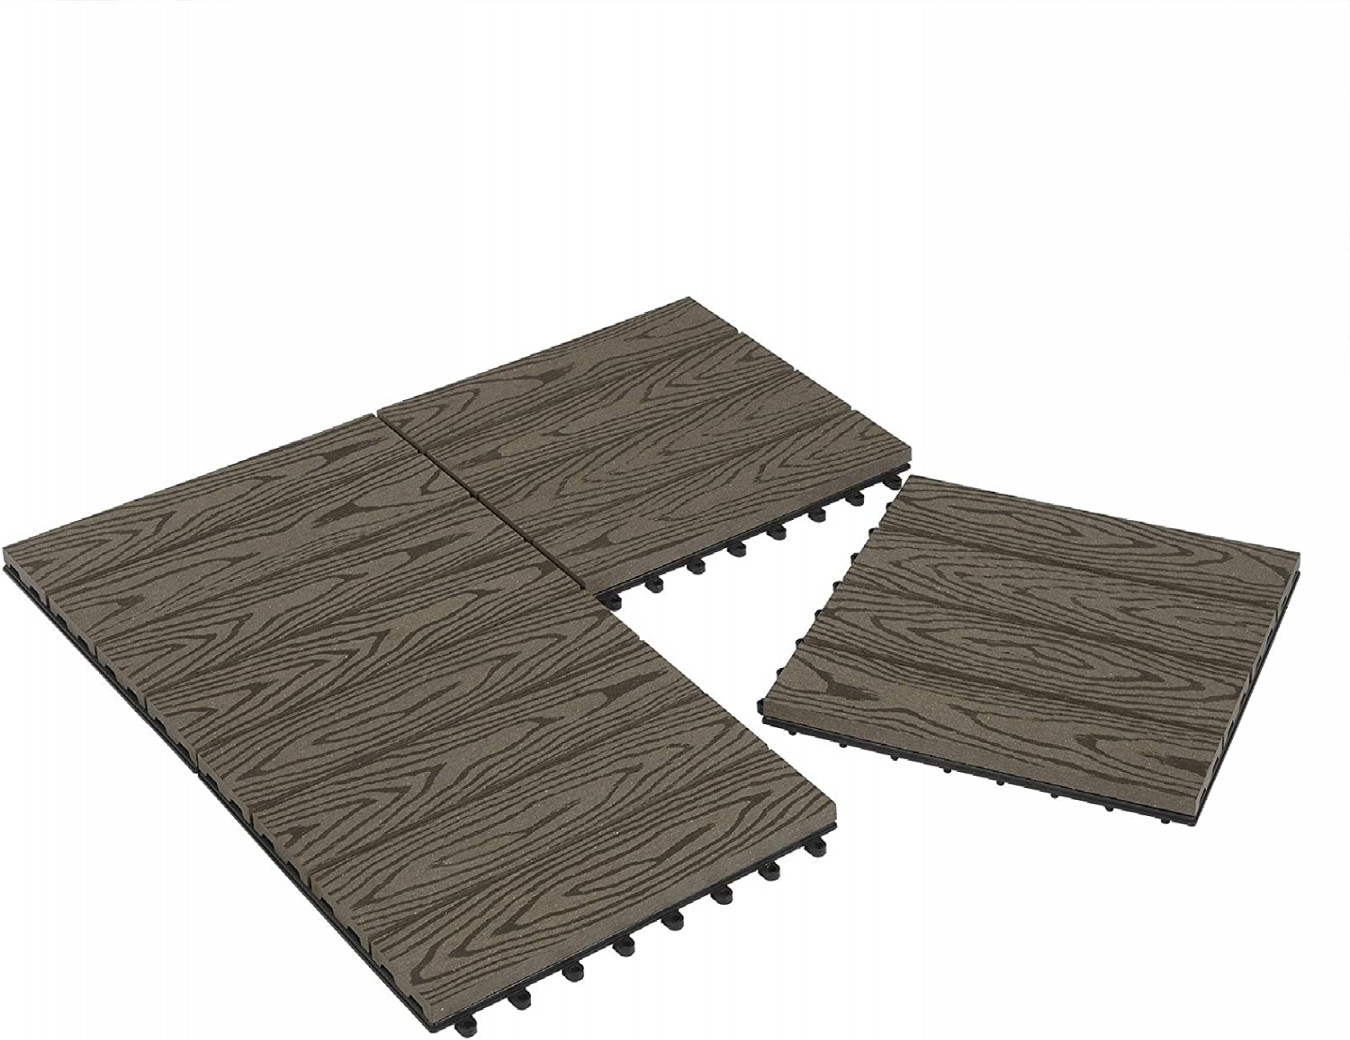 Laneetal WPC Wooden Tiles Patio Tiles Click System  x  cm for Patio and  Balcony Floor Tiles Click Tile Flooring  m² Coffee in Wood Effect Set of